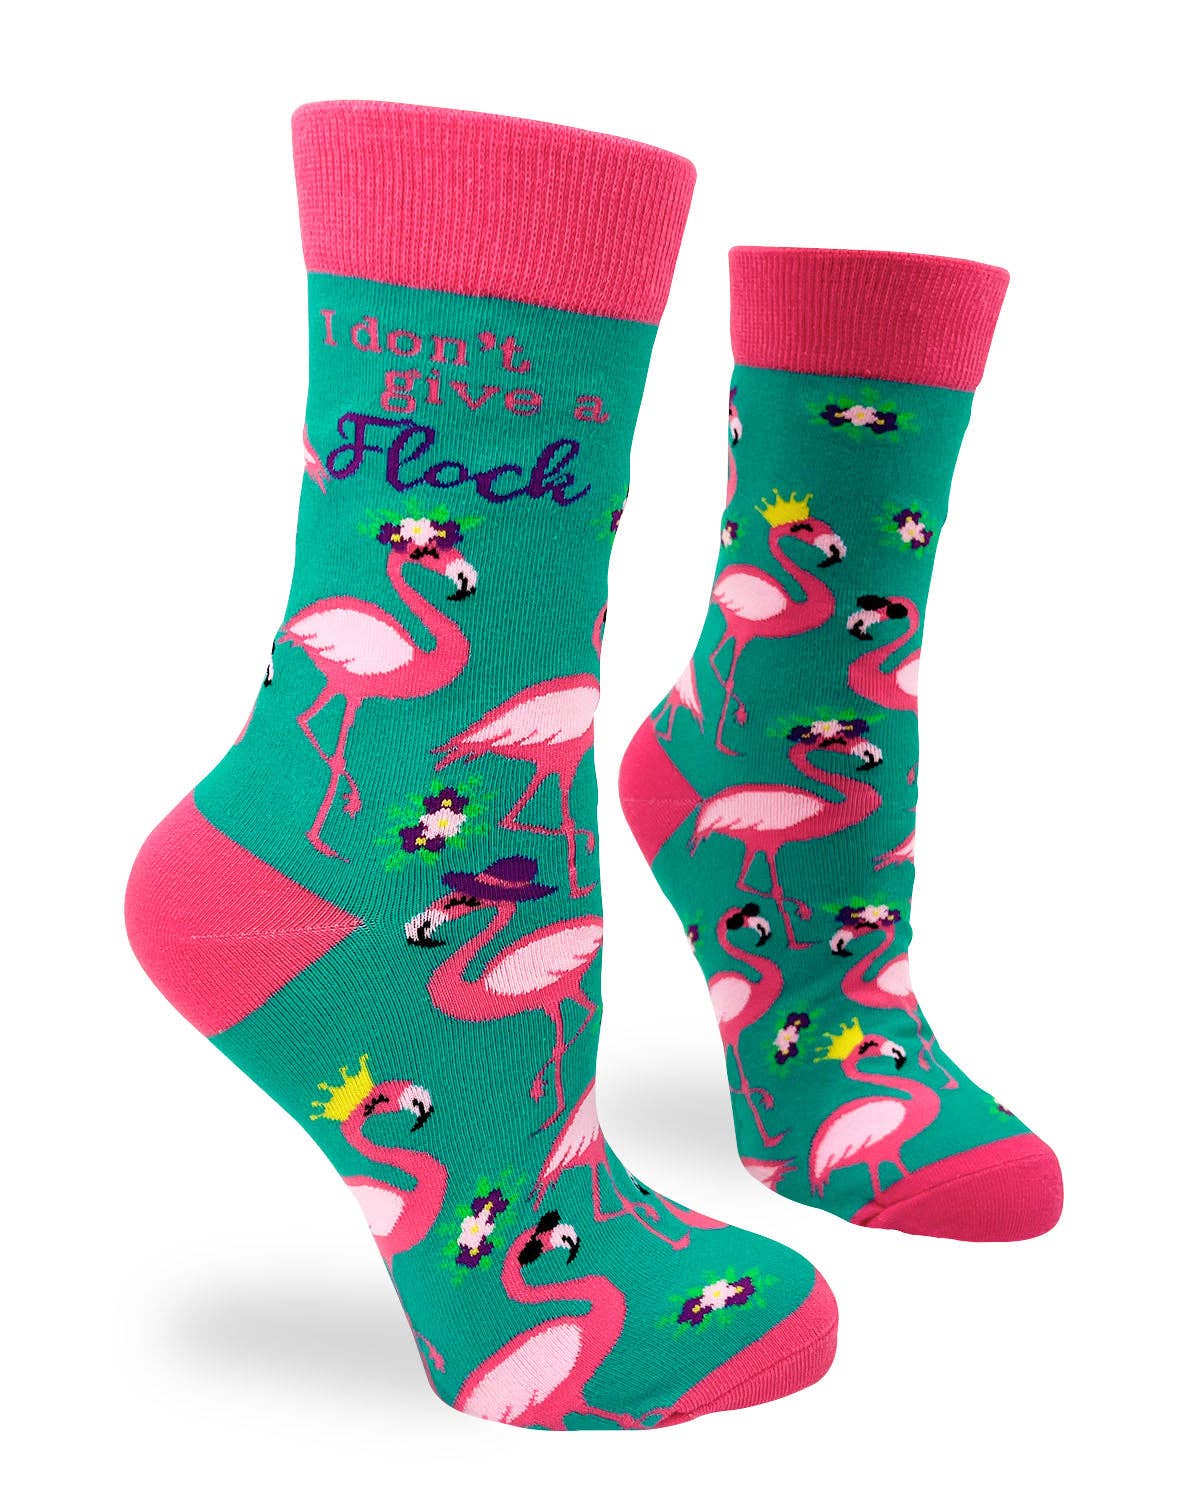 I Don't Give a Flock Women's Crew Socks Featuring Pink Flami